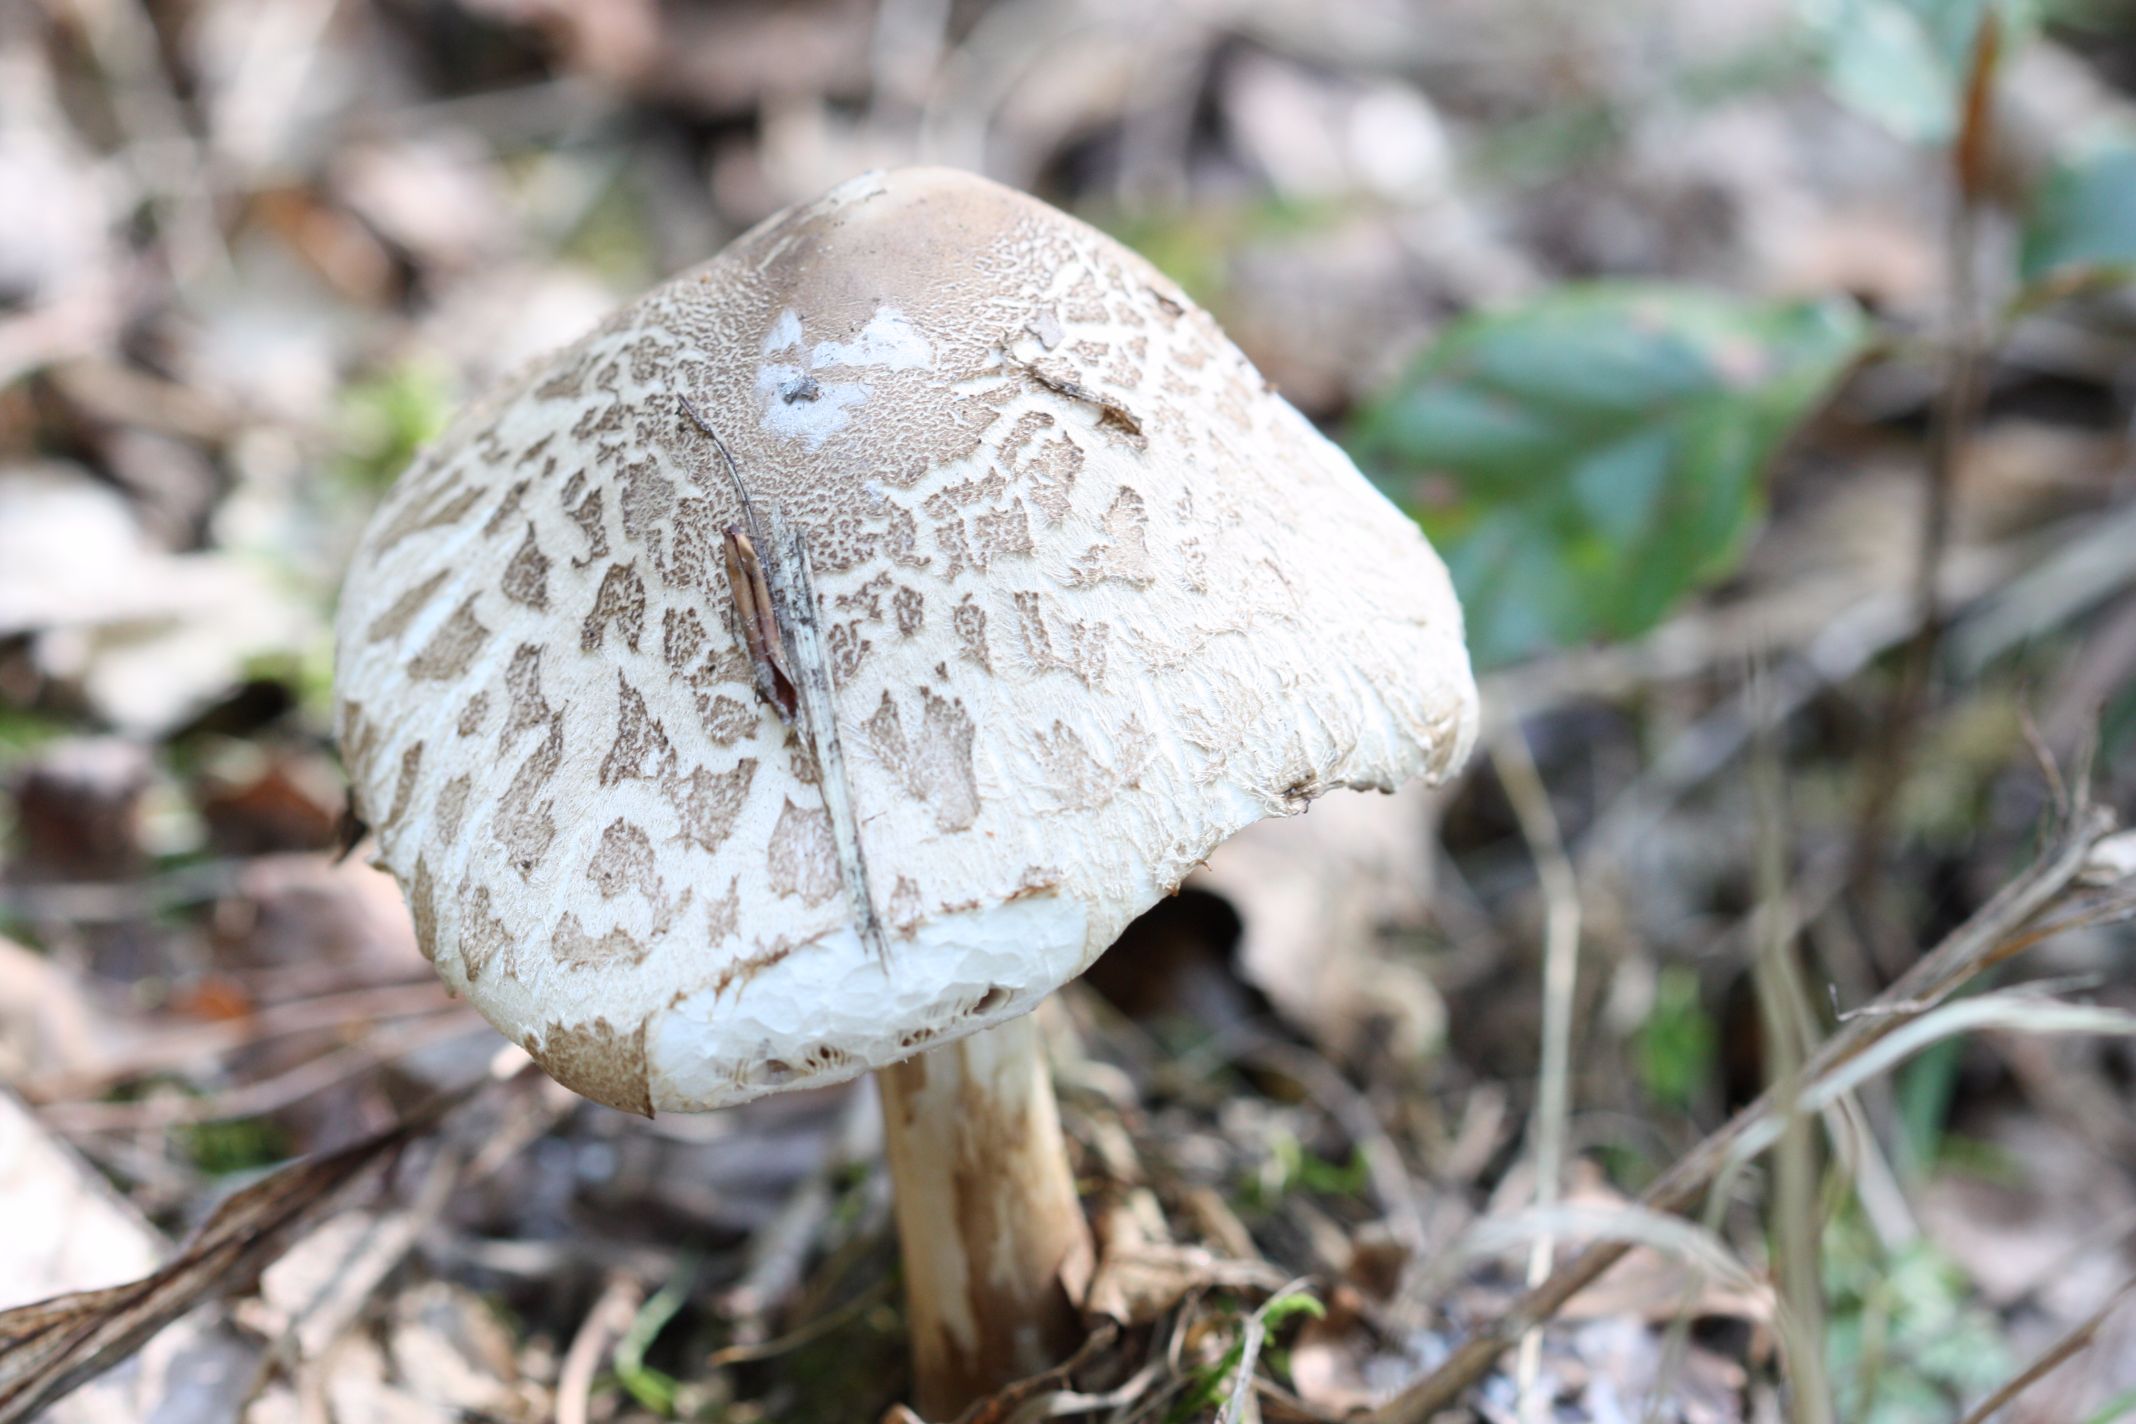 When is the Best Time to go Foraging for Mushrooms